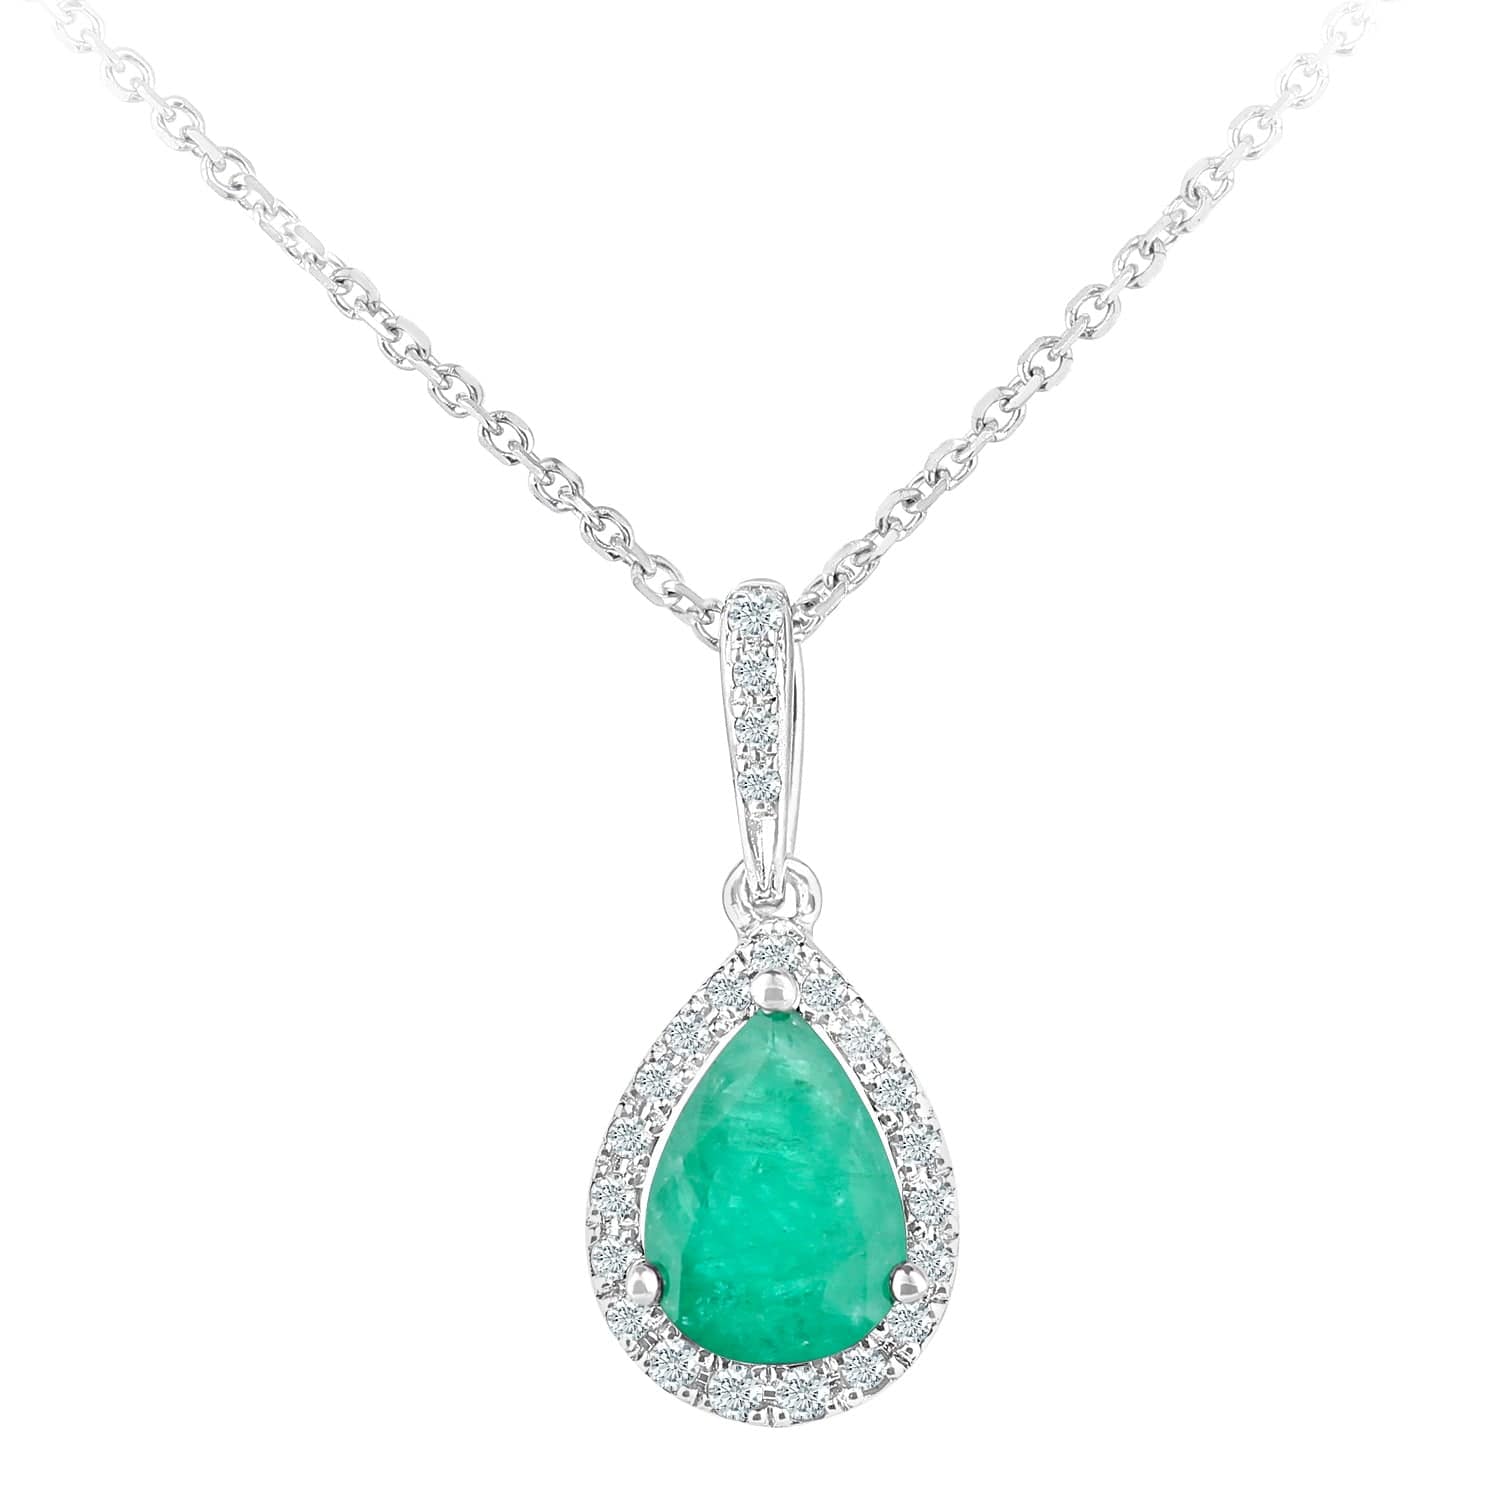 Lynora Luxe Pendant White Gold 9ct / Emerald 9ct White Gold Emerald and Diamond Teardrop Pendant Necklace